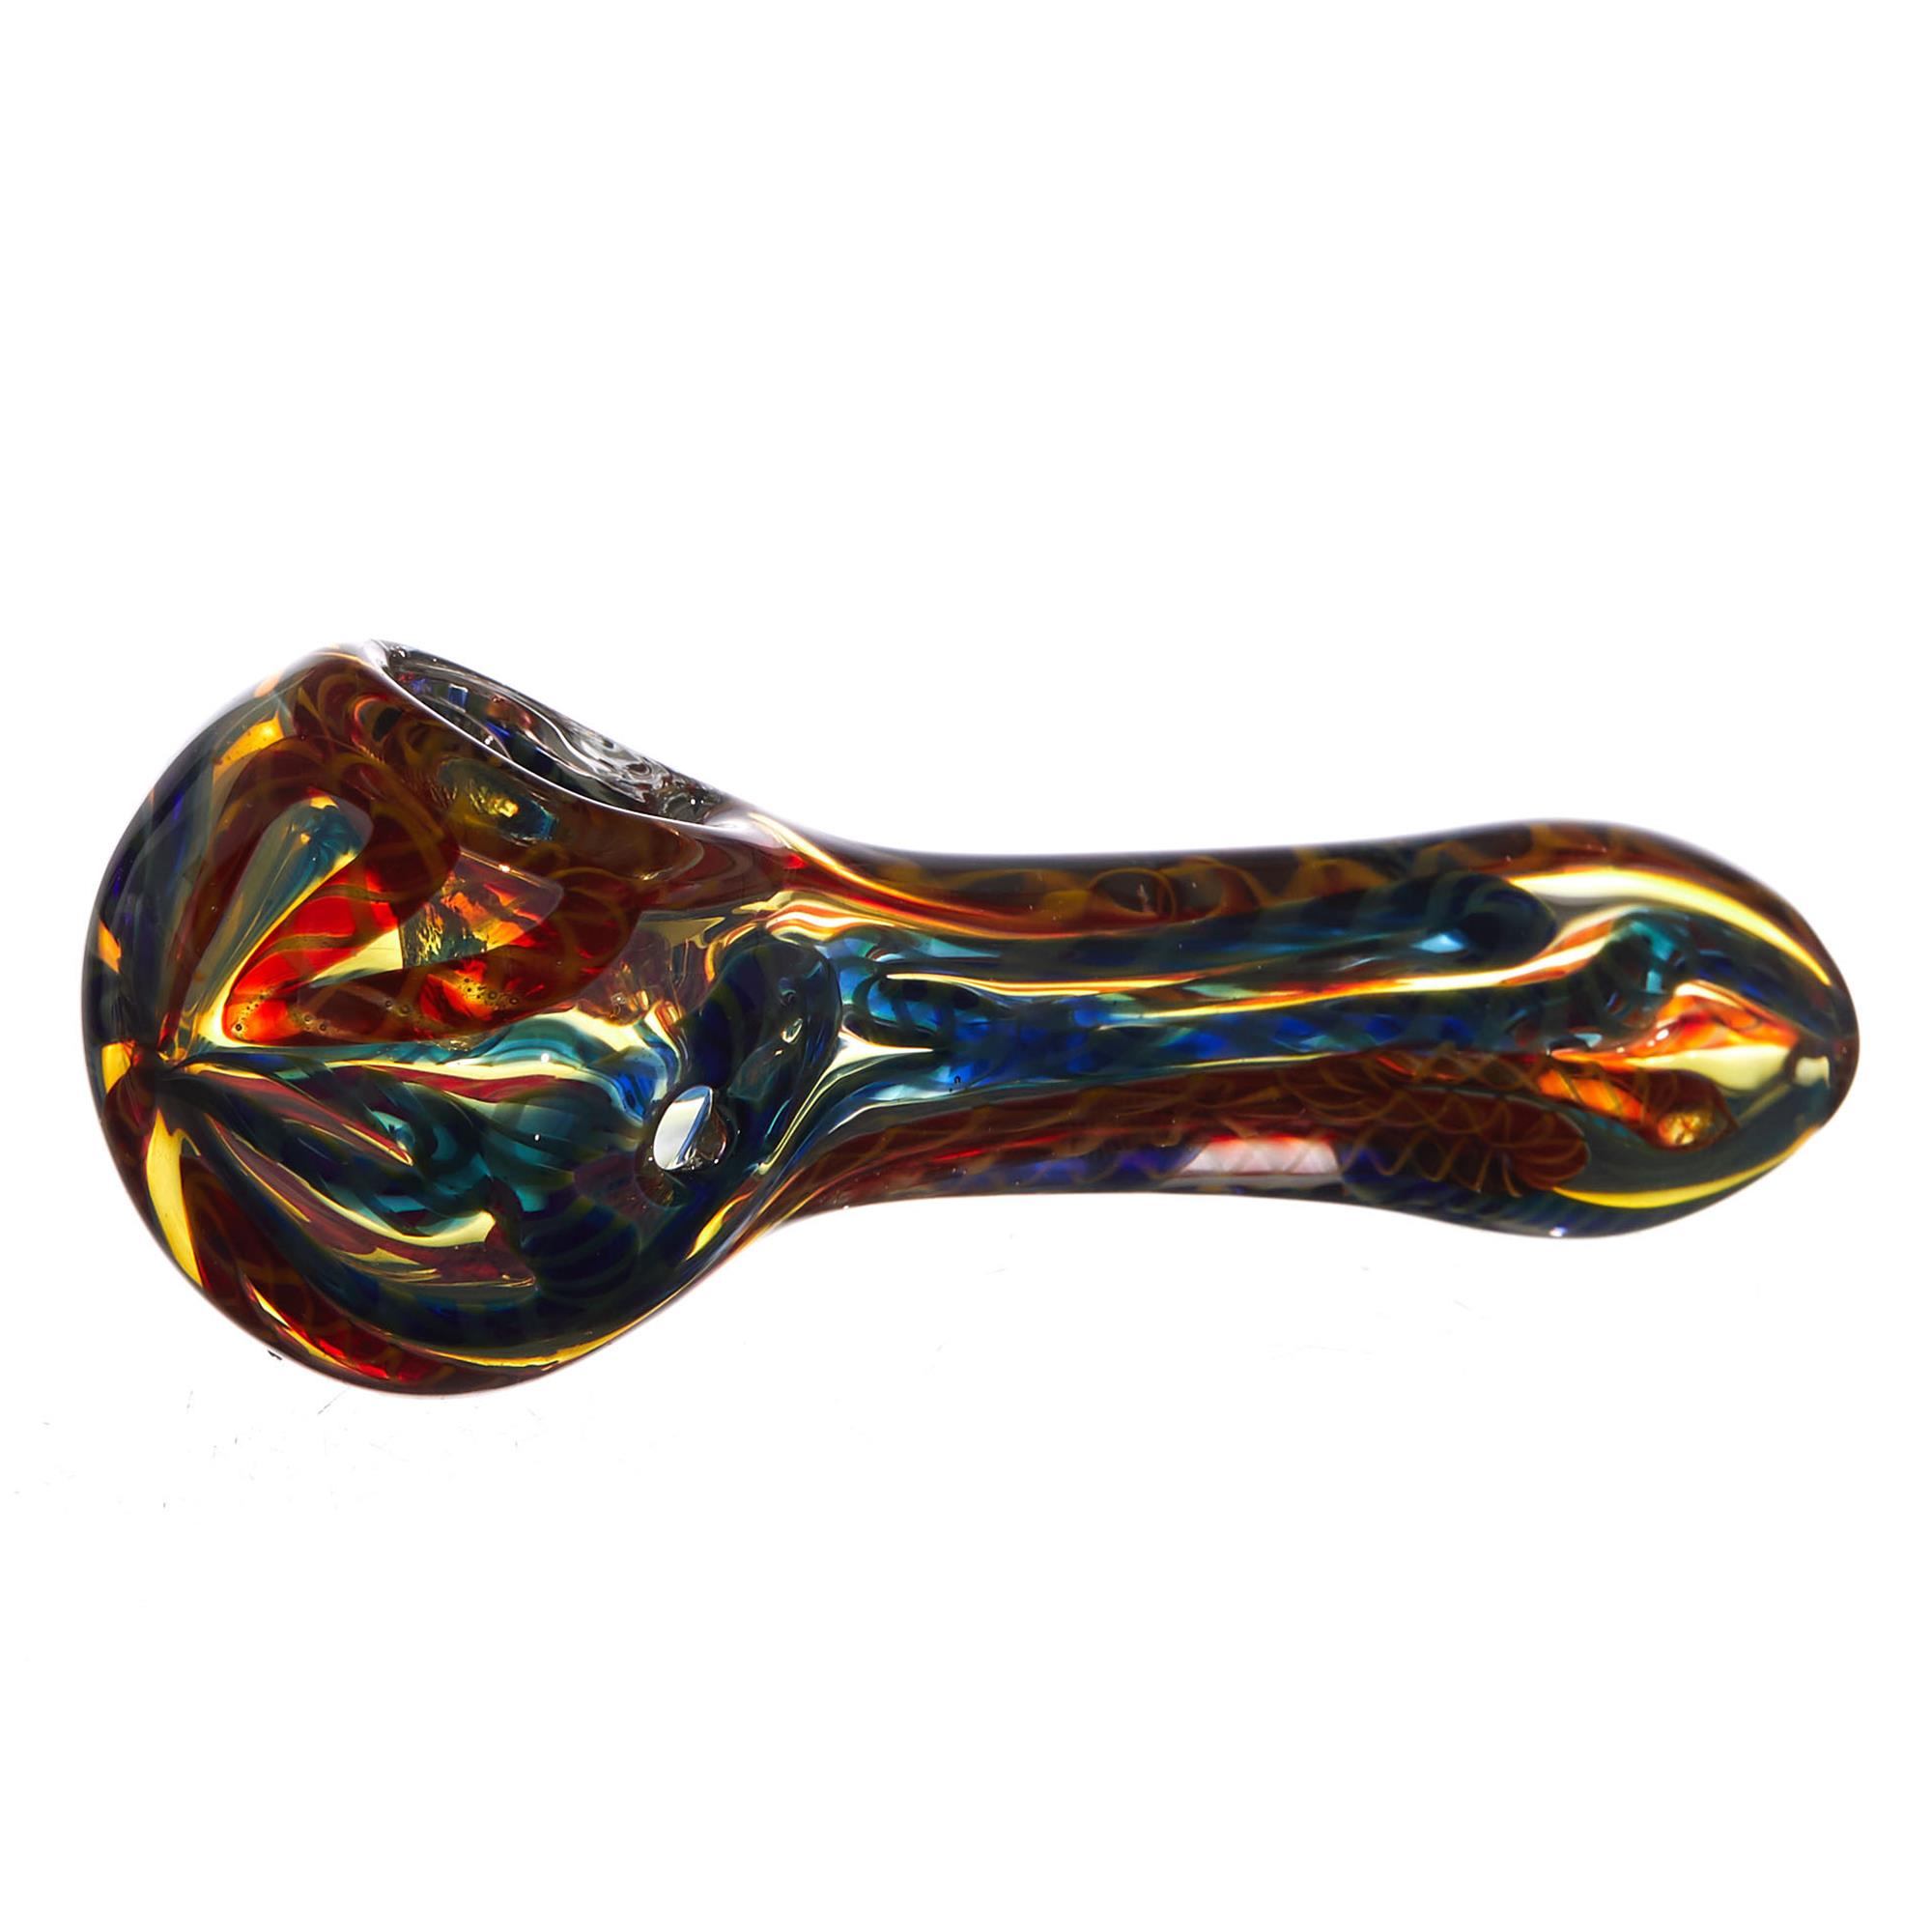 UP IN SMOKE SPOON PIPE